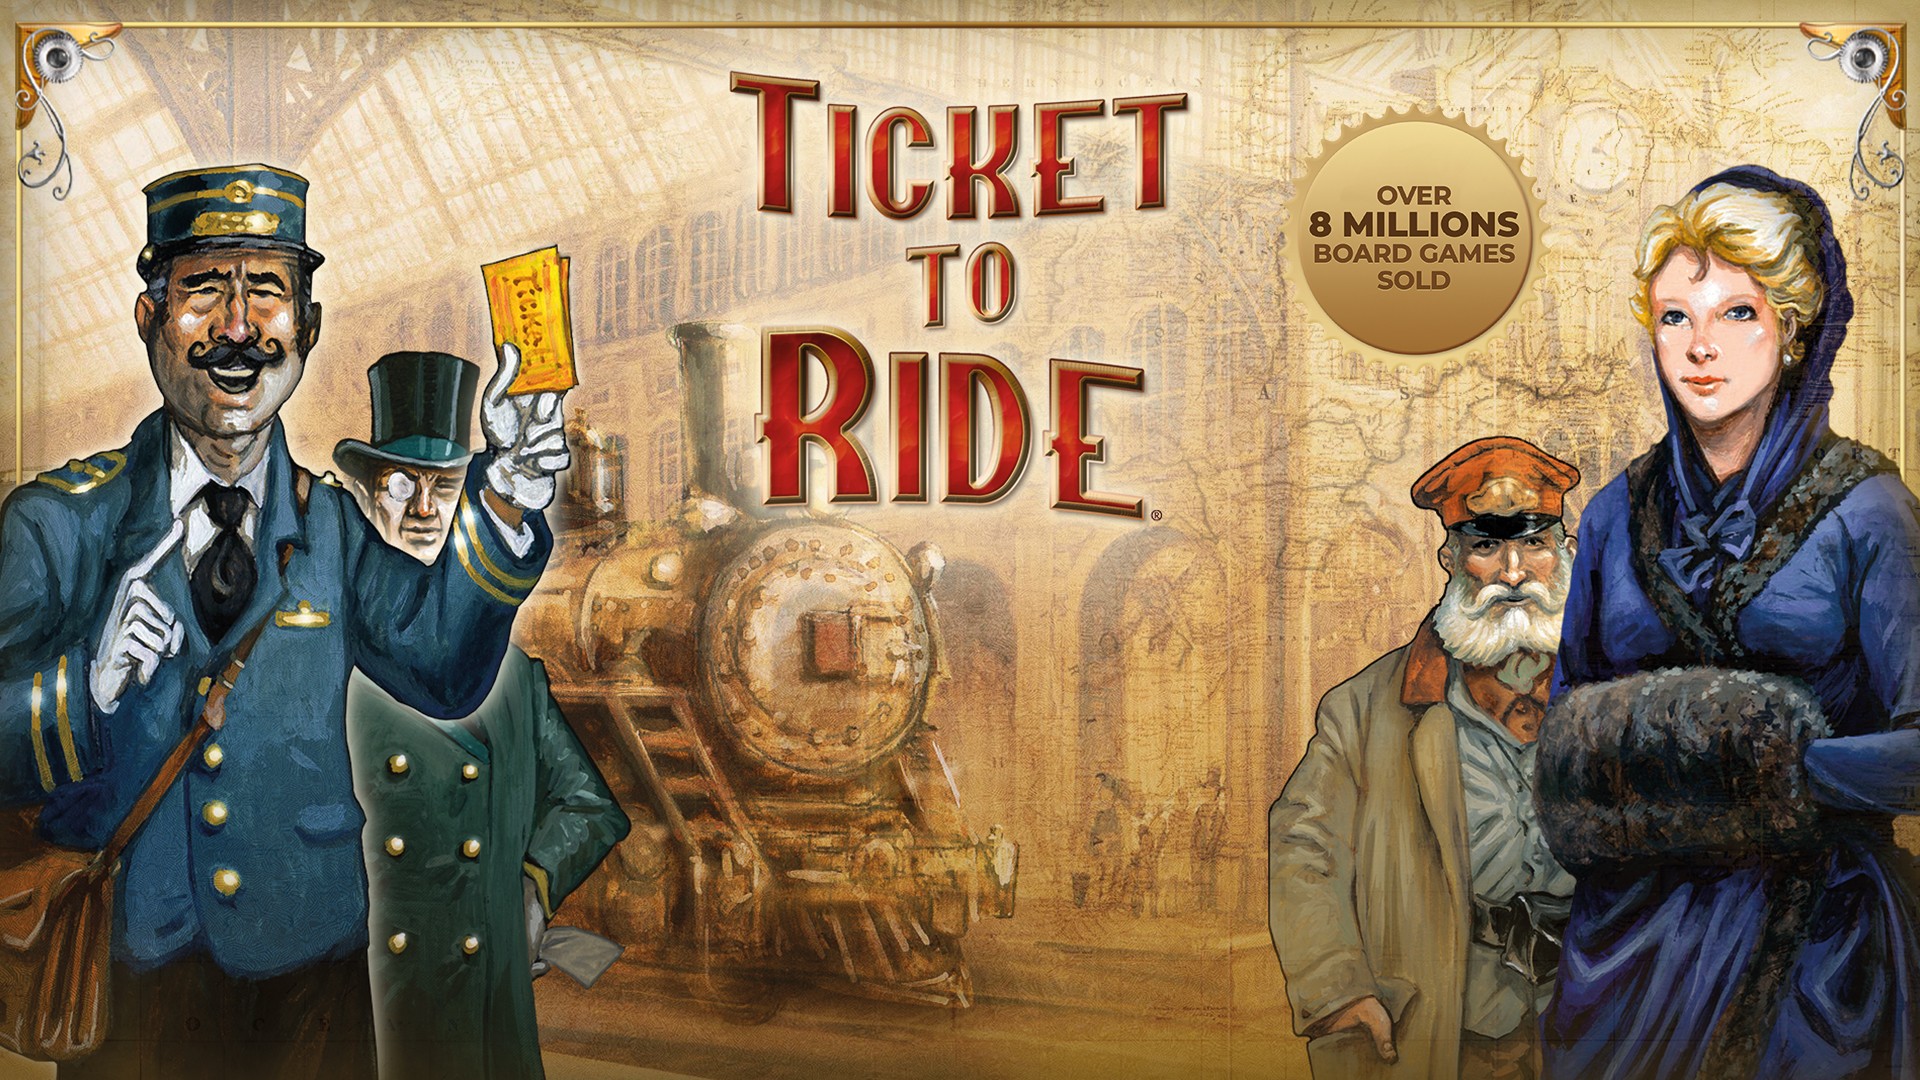 Ticket to Ride has a new PC game, but it's not going down well with fans